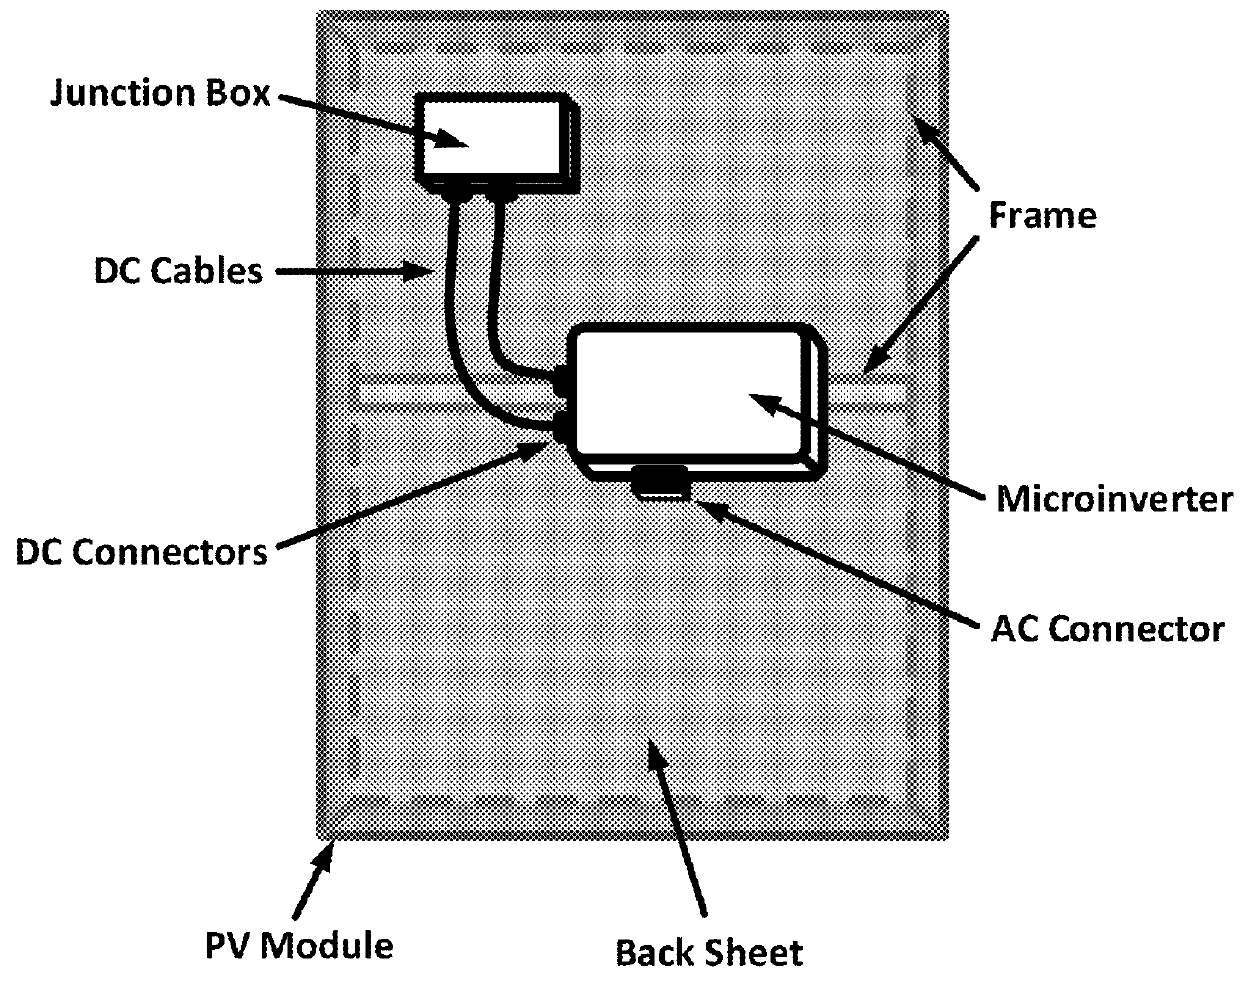 Integrated microinverter housing for a PV AC module